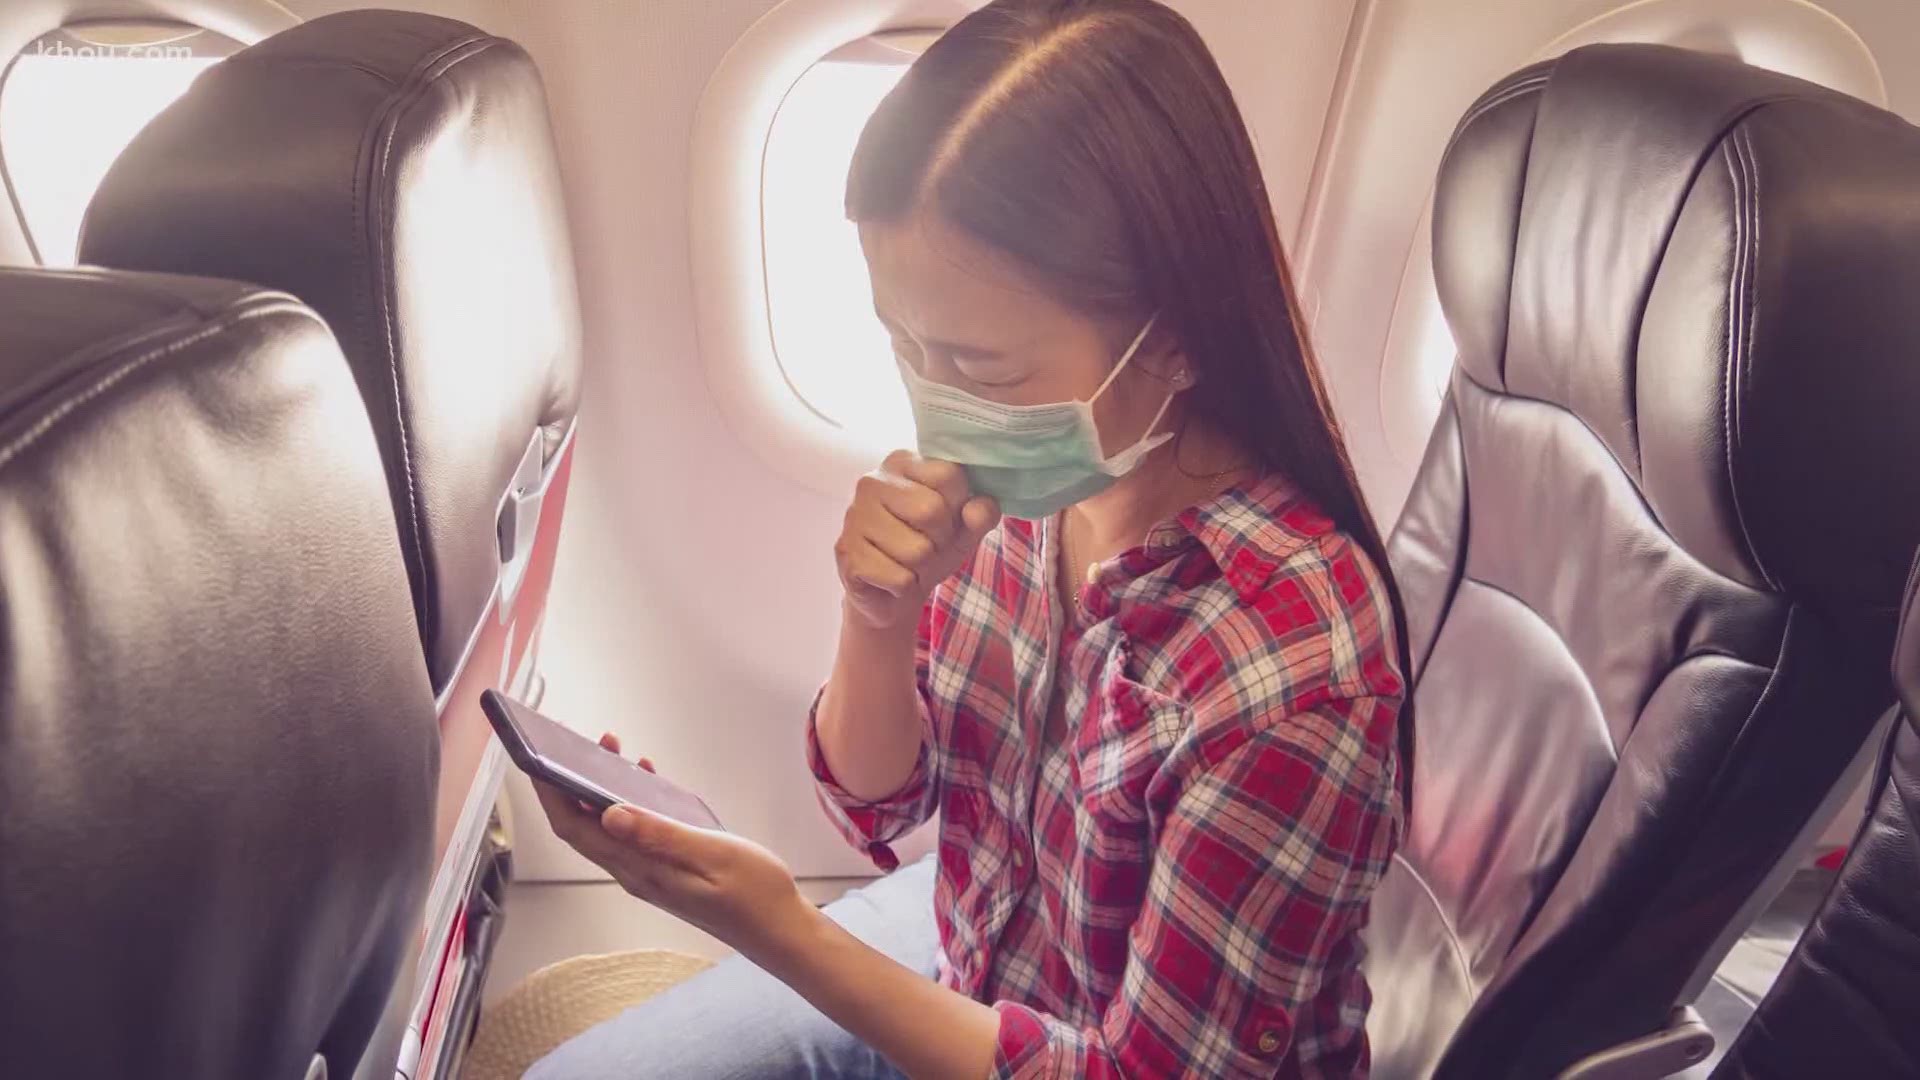 Many airlines are taking extra steps to ensure their planes are clean and virus free before taking off.